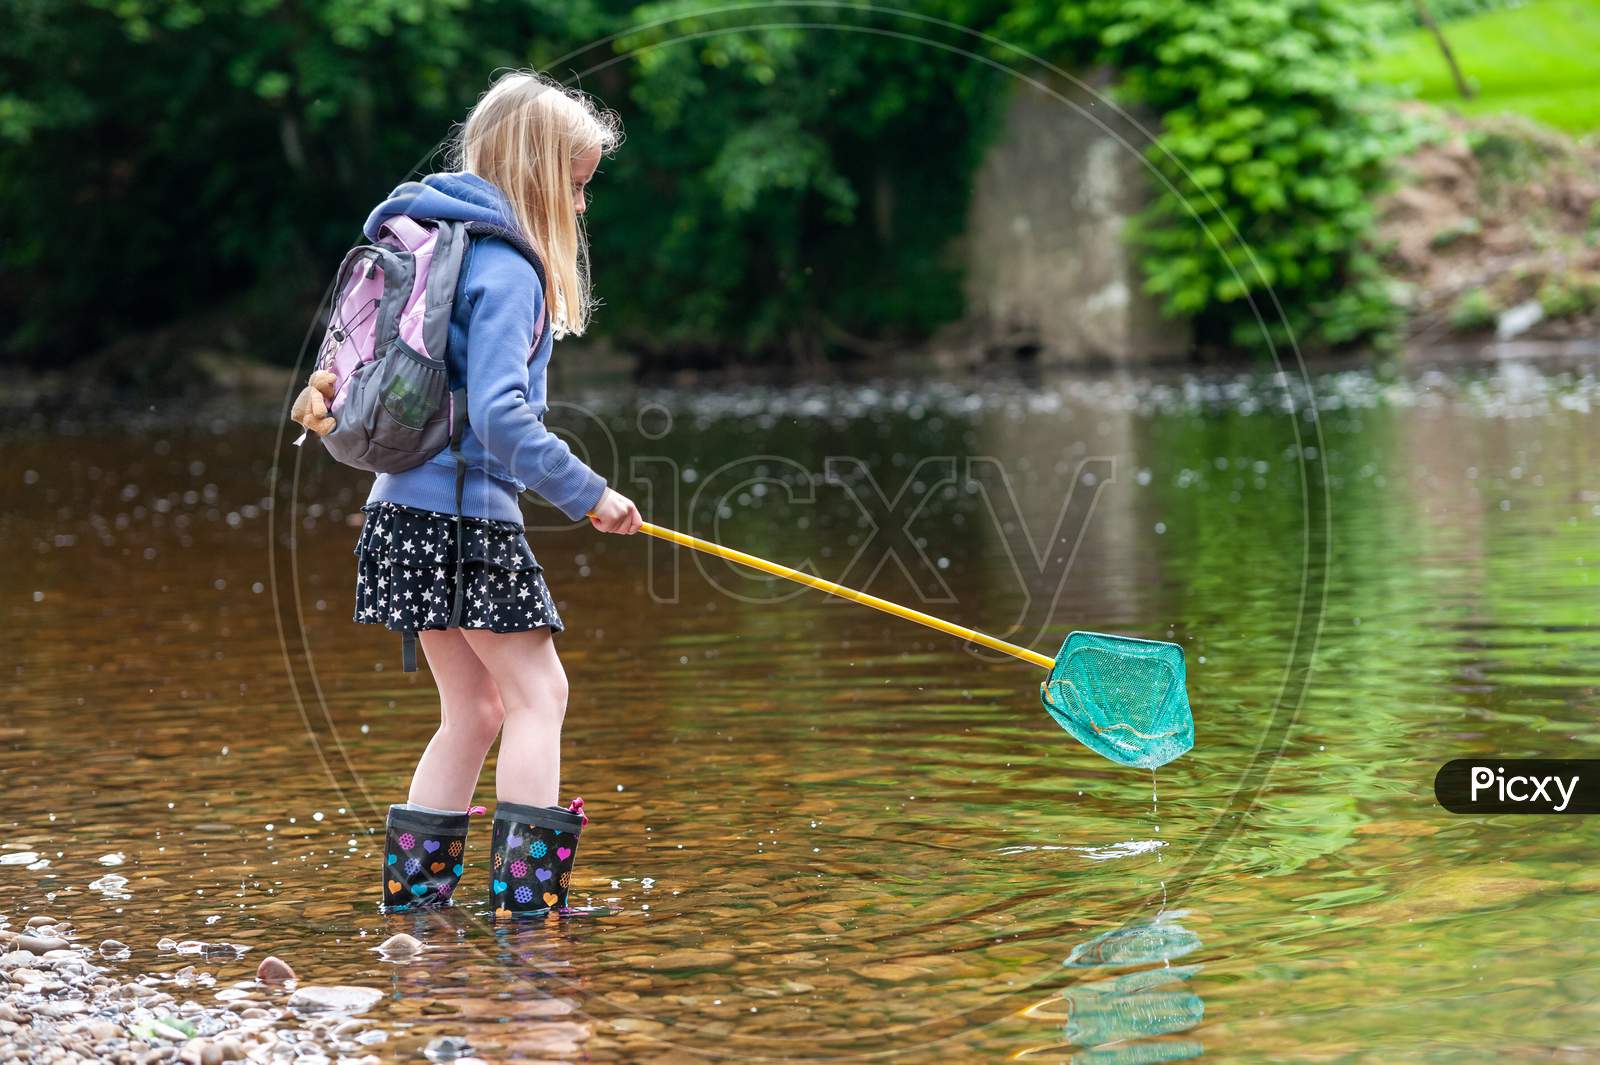 Young Blonde Girl Wish Fishing Net Wading Into River